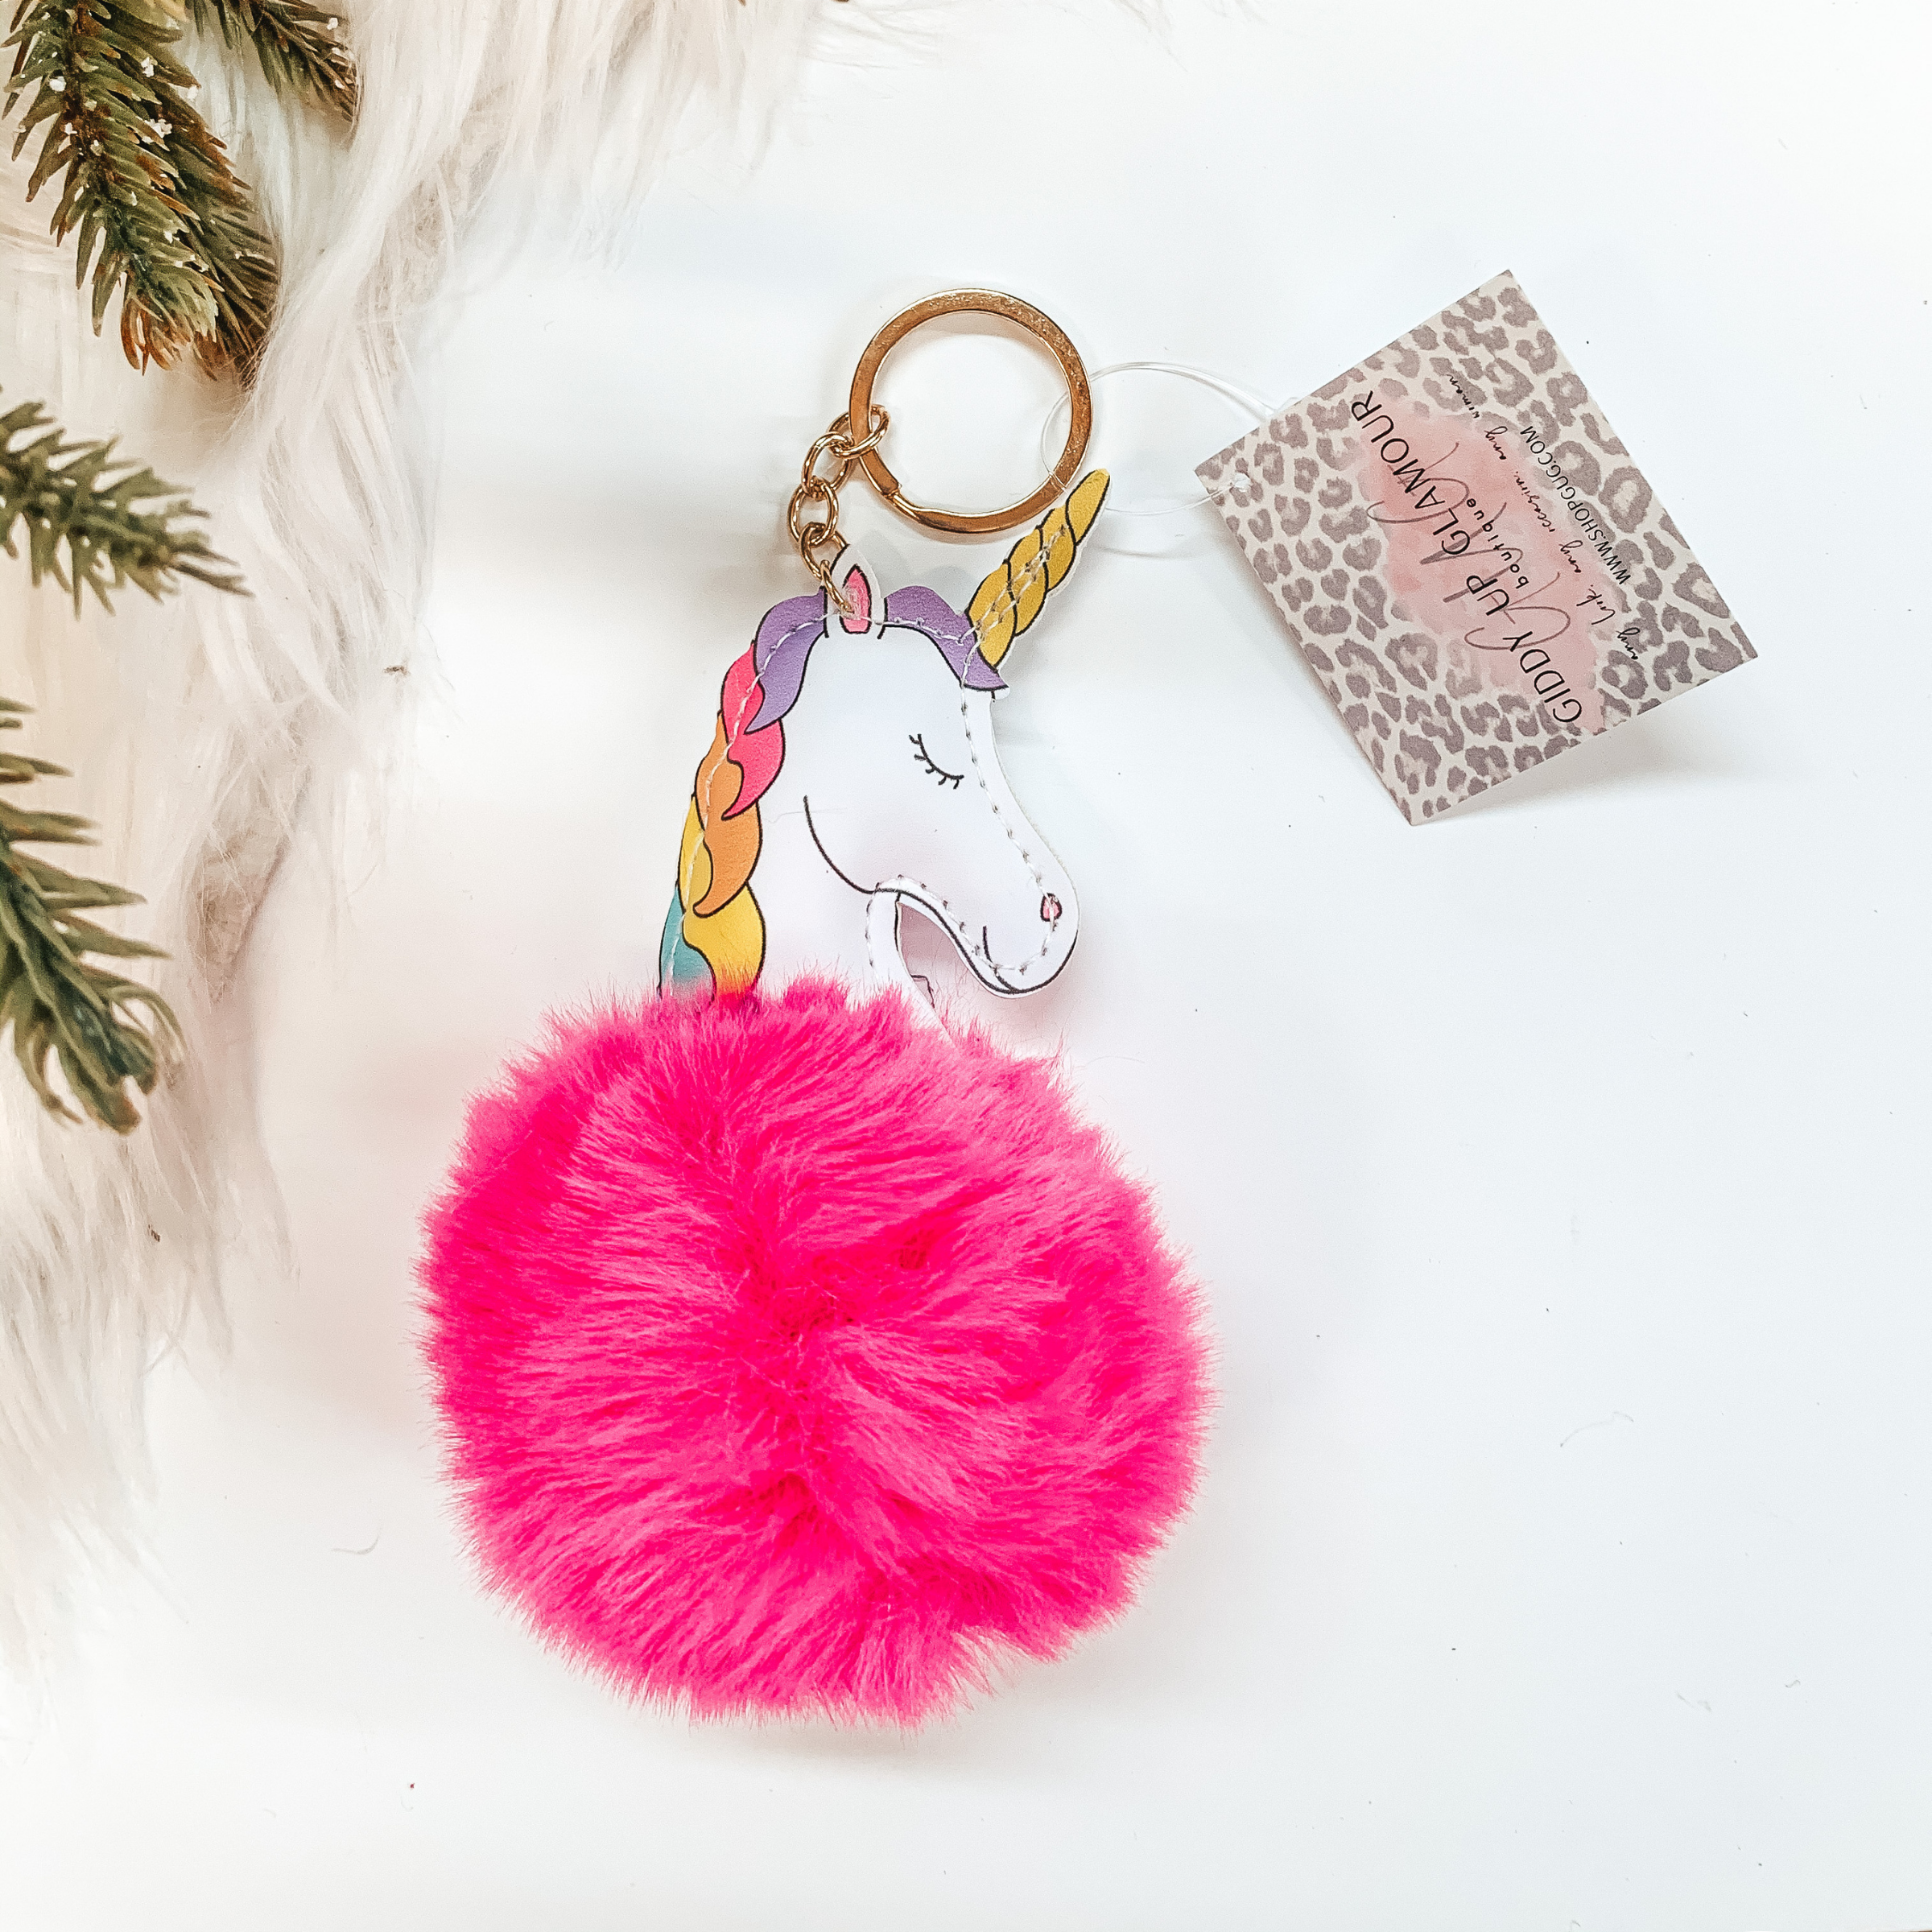 Buy 3 for $10 | Unicorn Puff Ball Keychain - Giddy Up Glamour Boutique